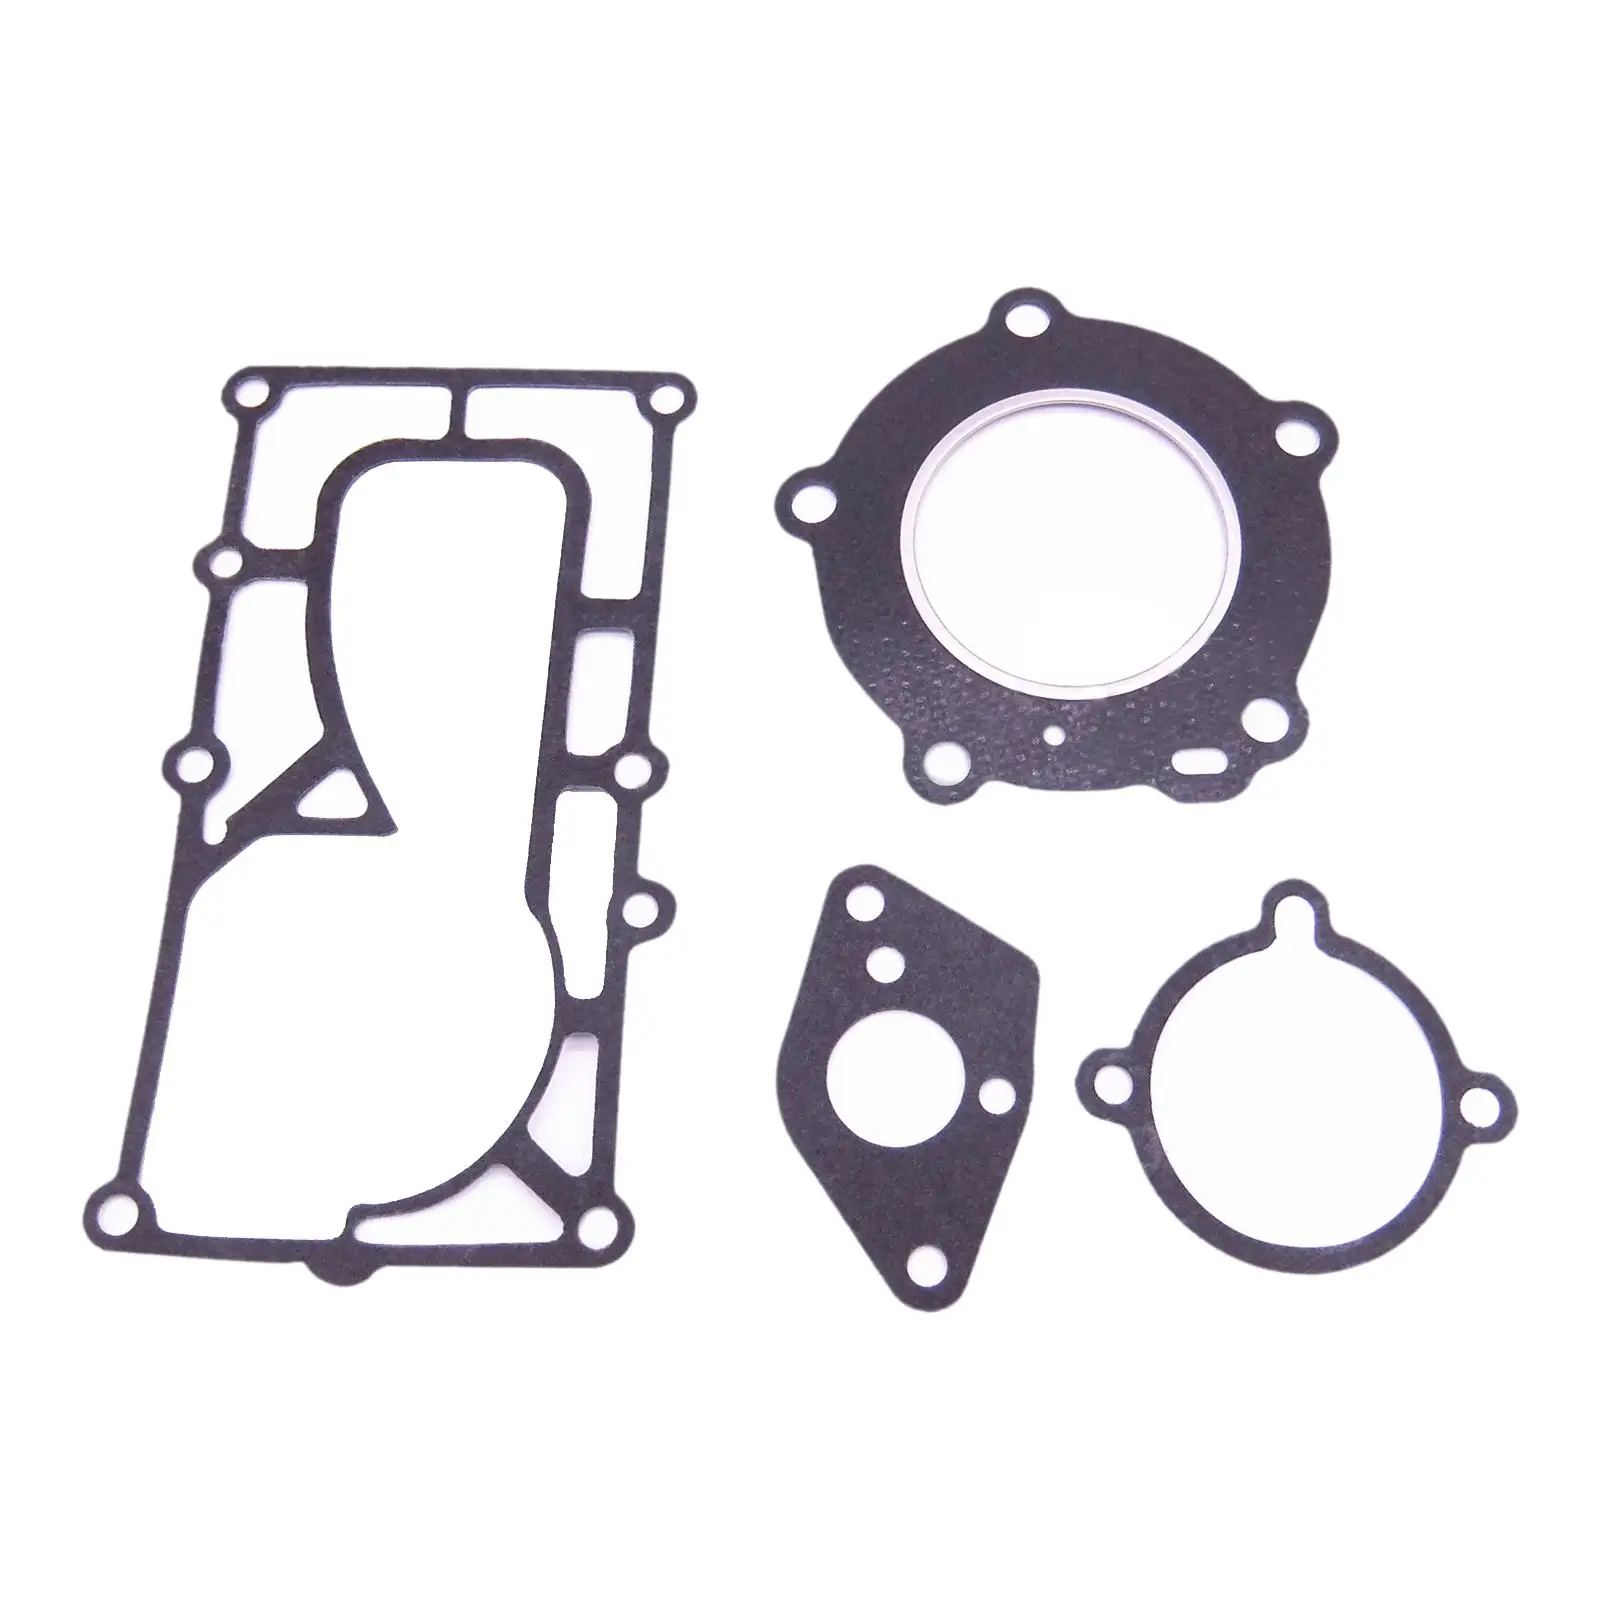 Complete Power Head Seal Gasket Kit 369-02011-0 369-0214-0 36901-0051M Boat Motor Fit for Nissan 4HP 5HP Outboard Engine